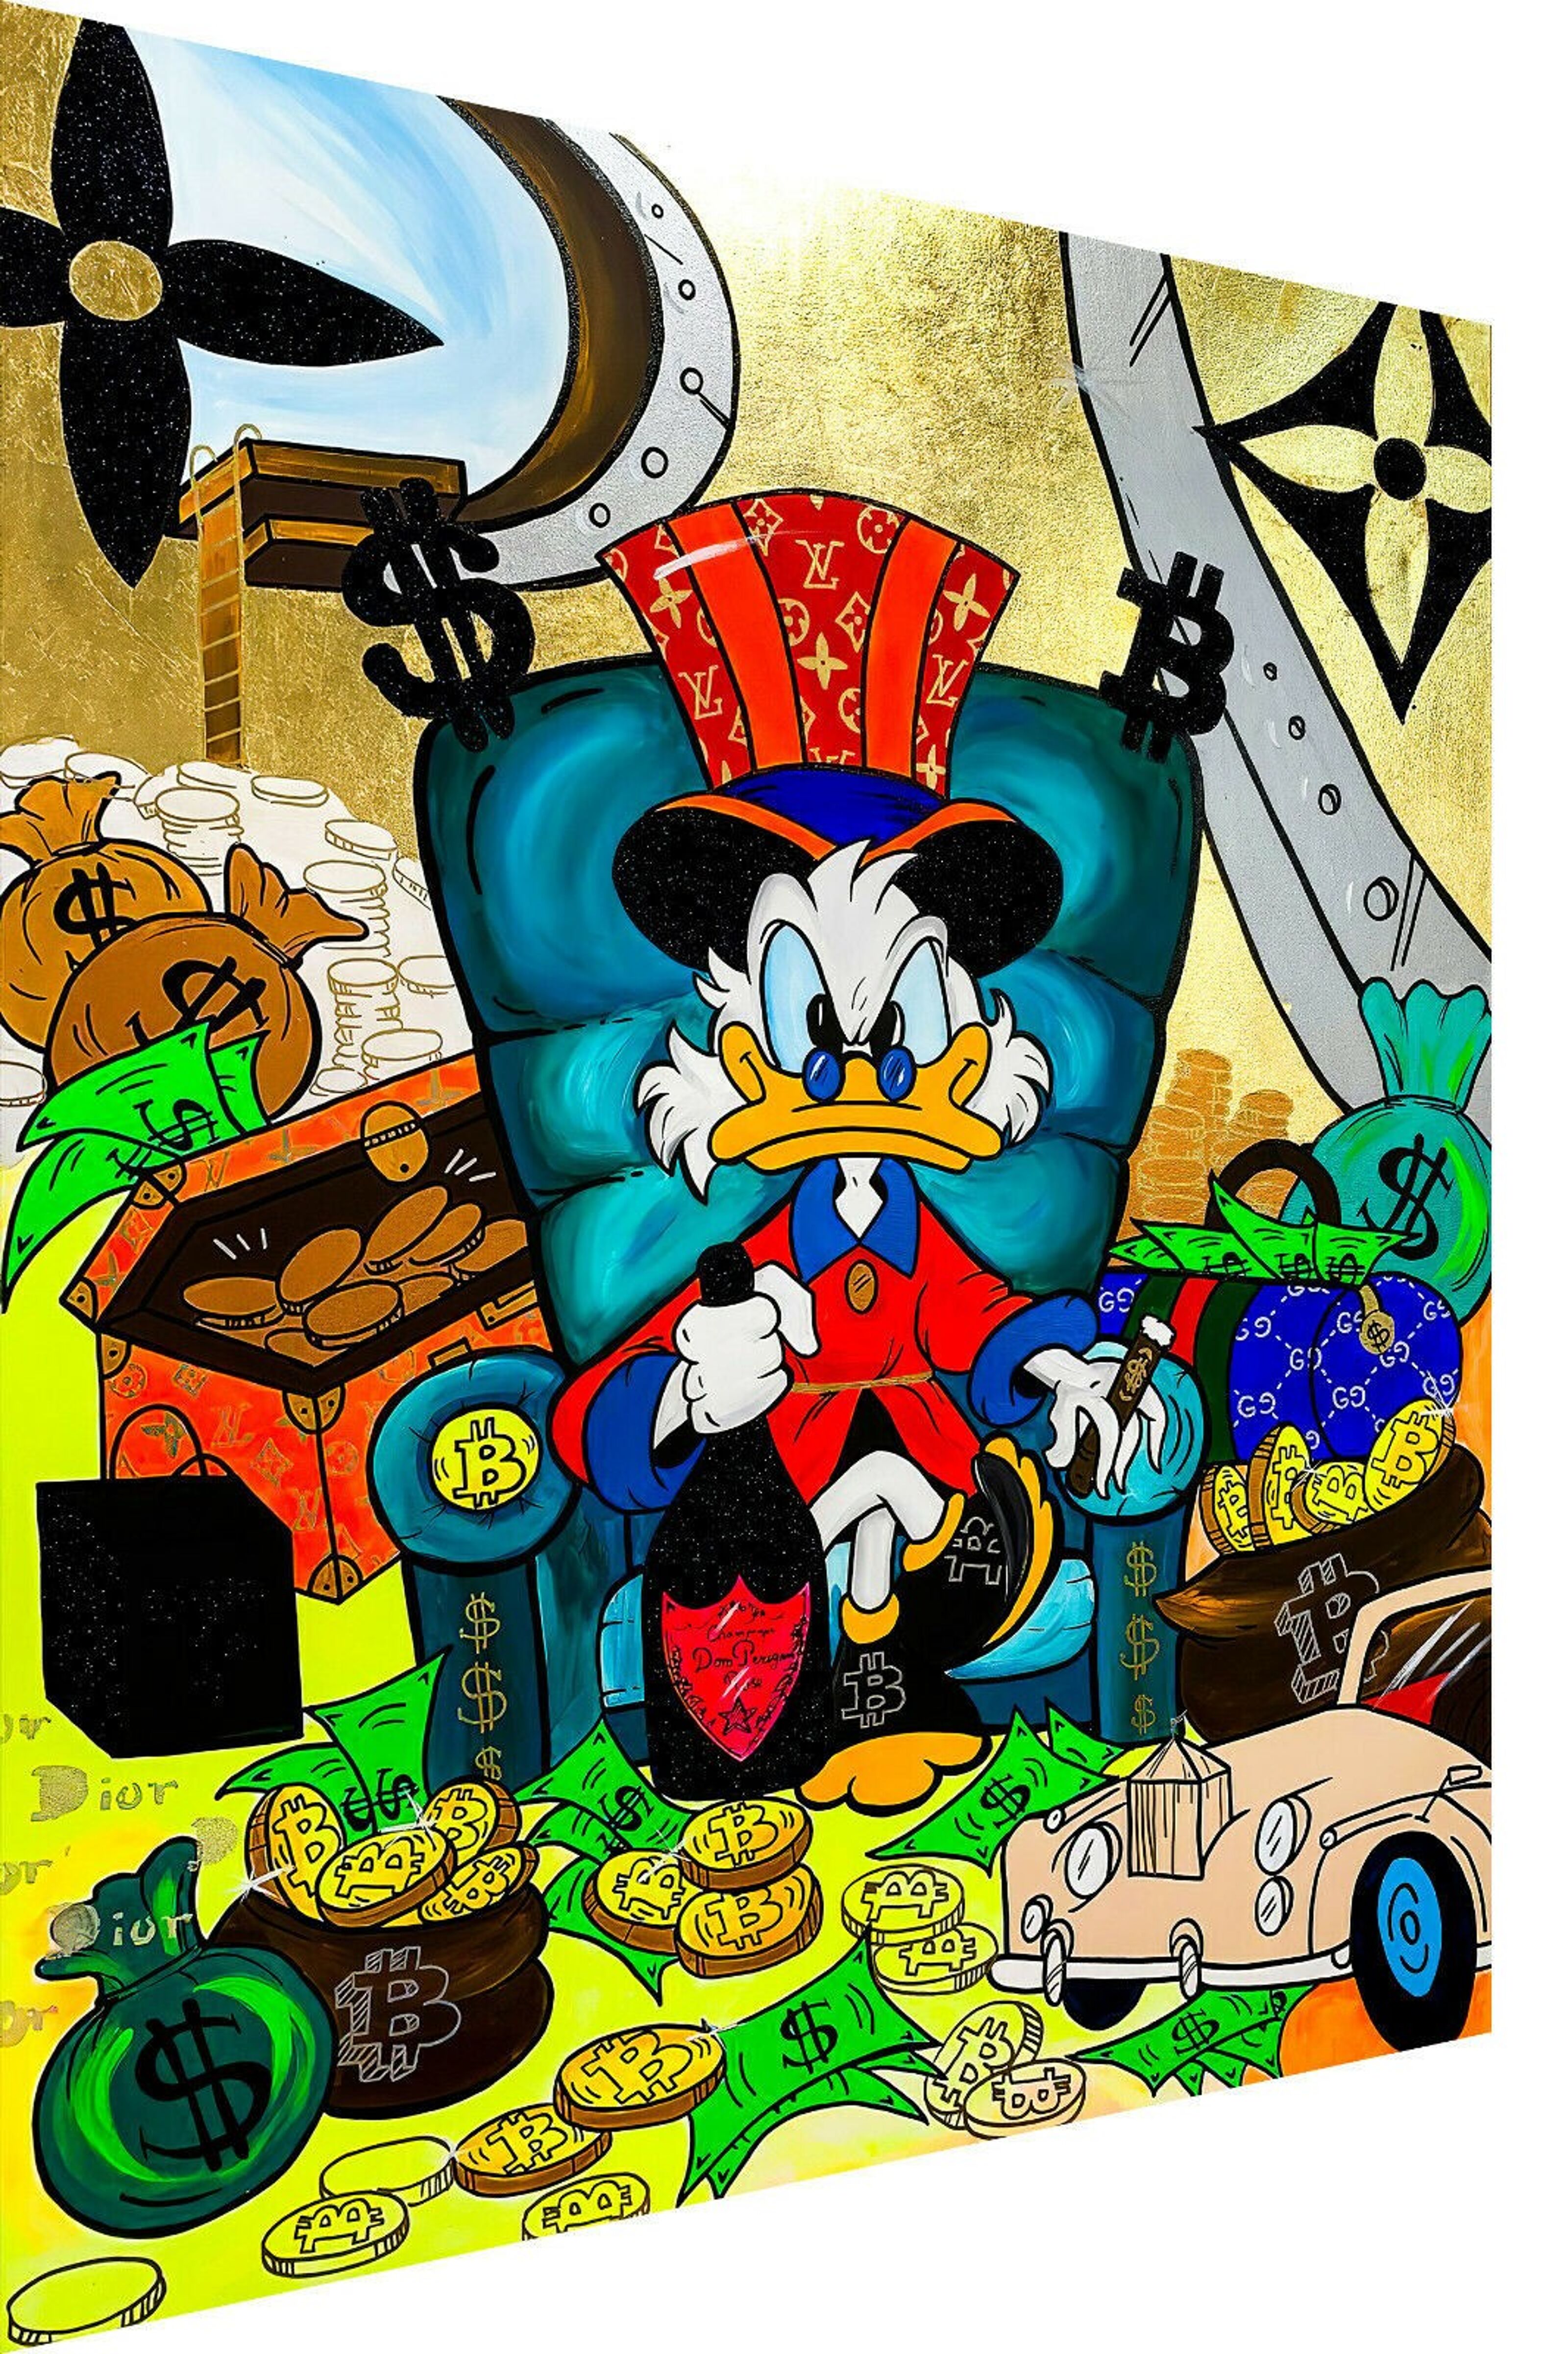 Compra Pop Art Scrooge McDuck King Canvas Wall Art - Ritratto - 100 x 75 cm  all'ingrosso